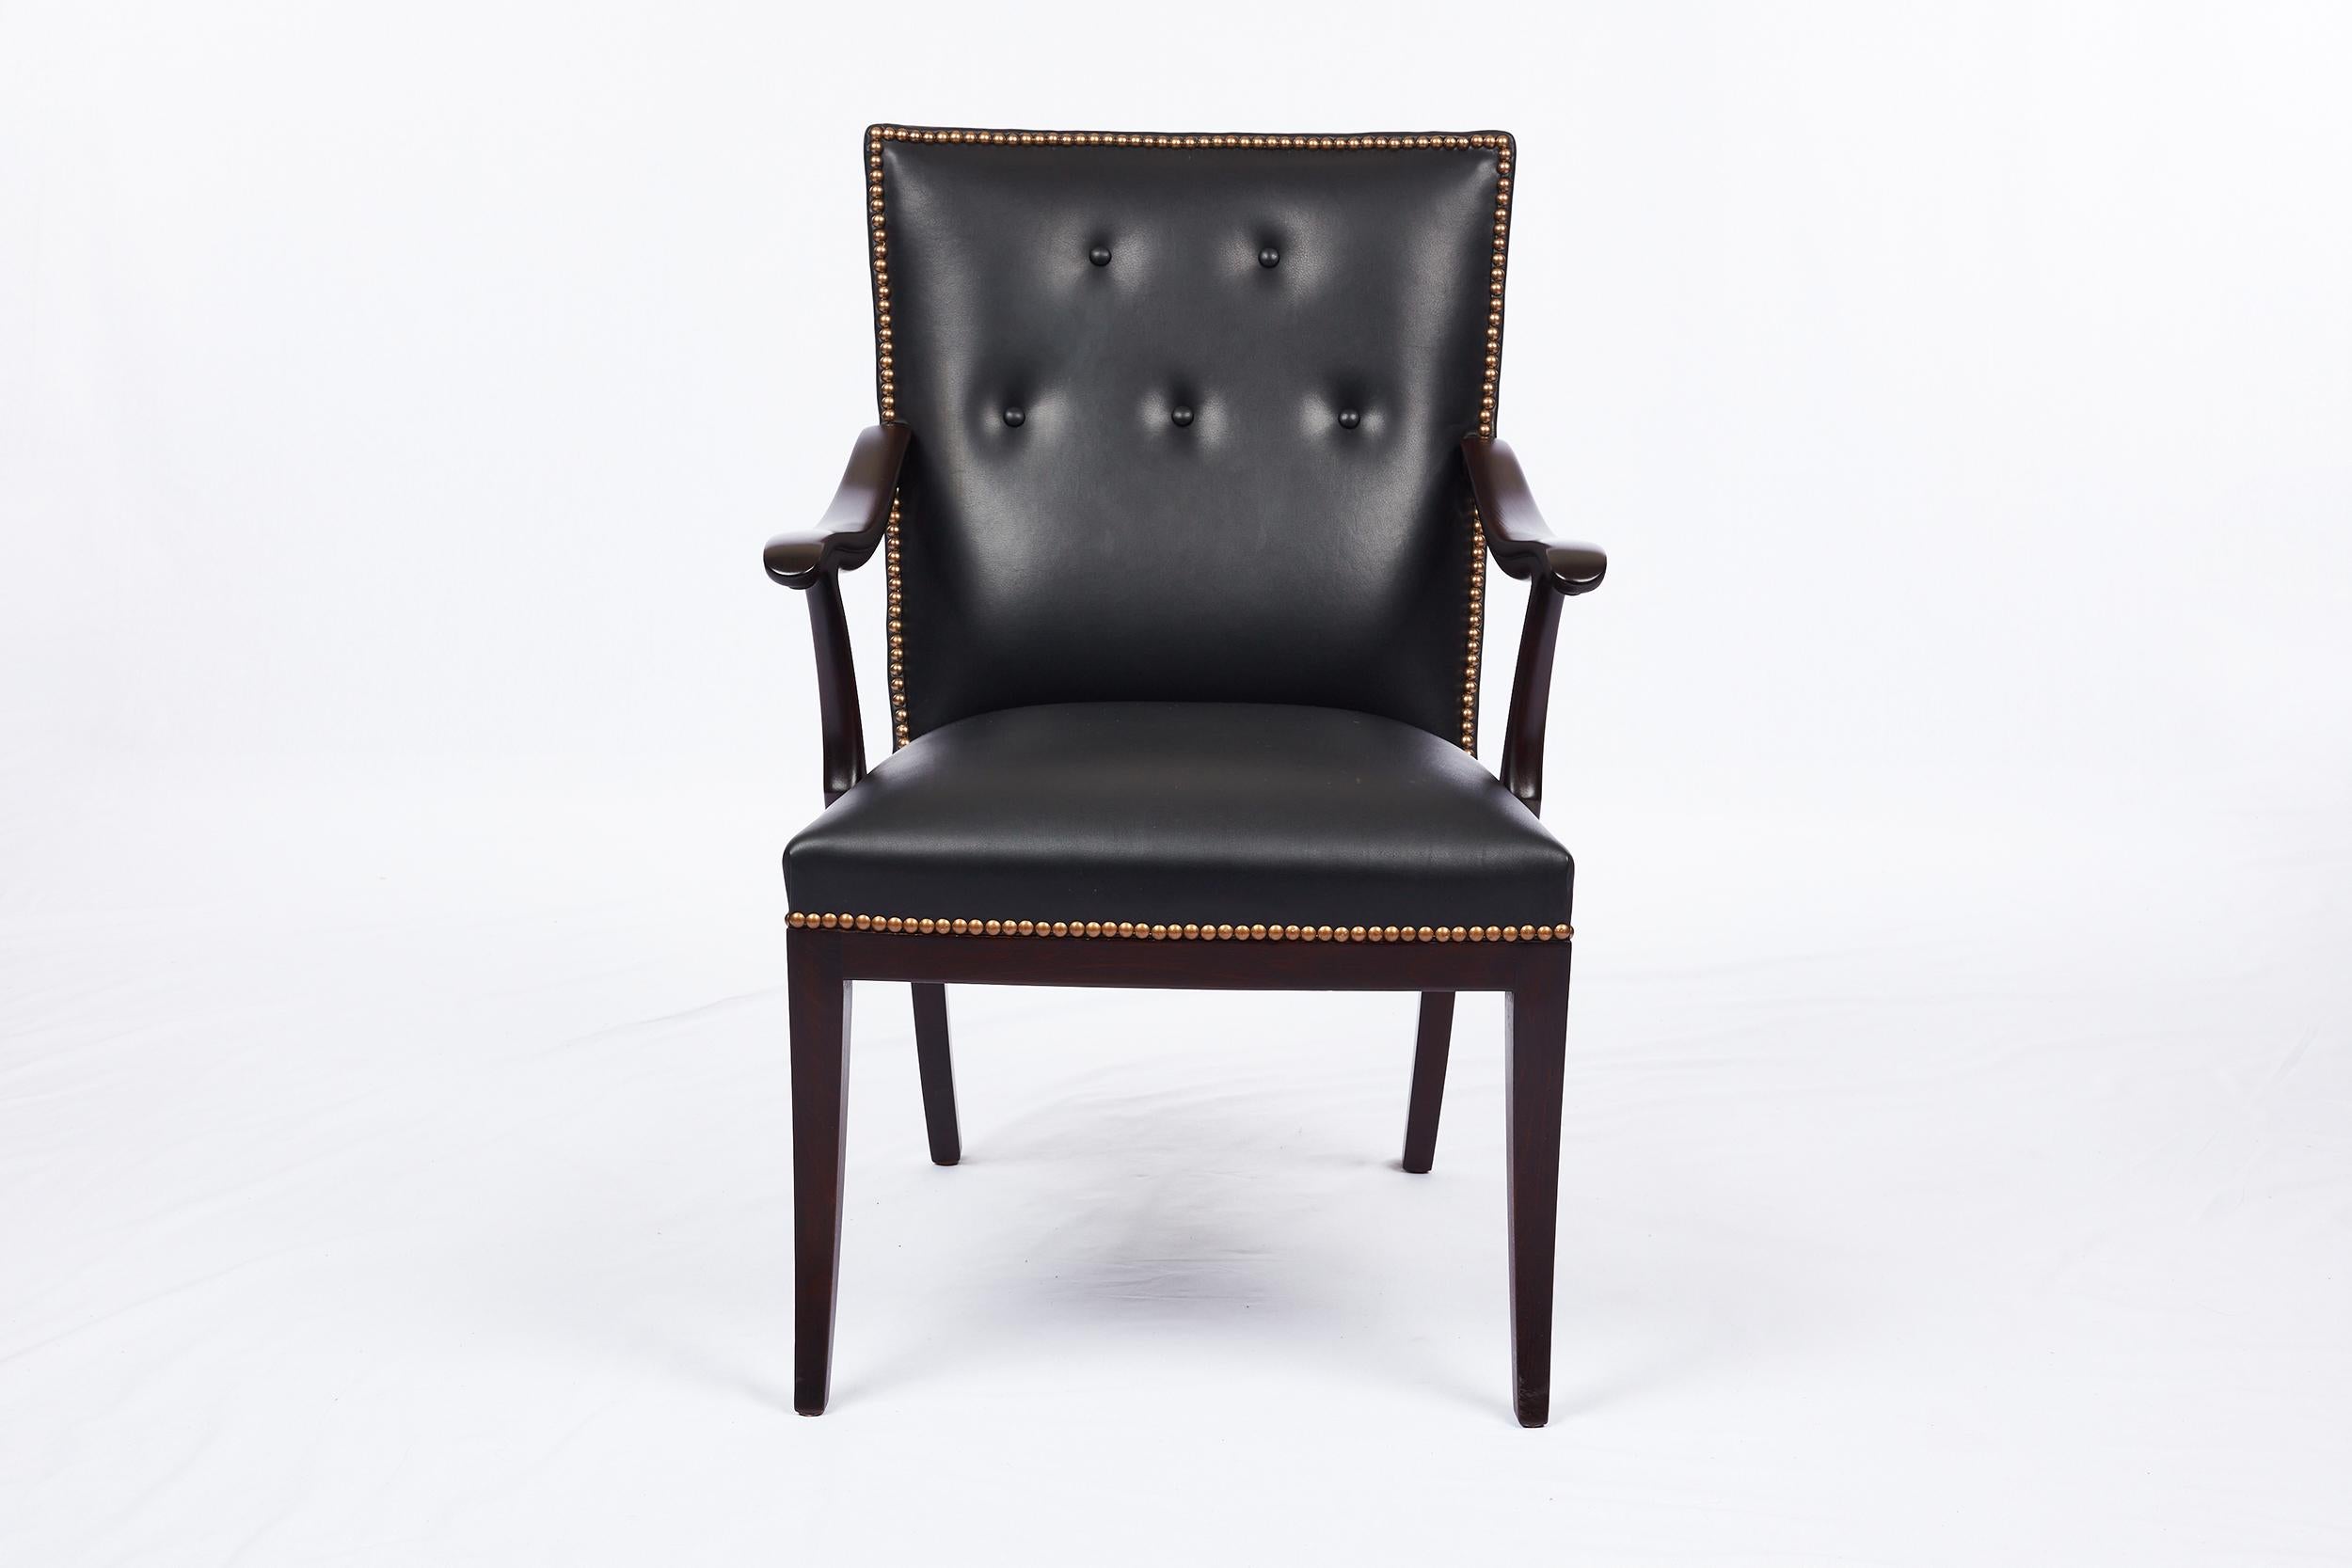 Frits Henningsen armchair. Designed in 1949. New black leather upholstery with brass nail heads.